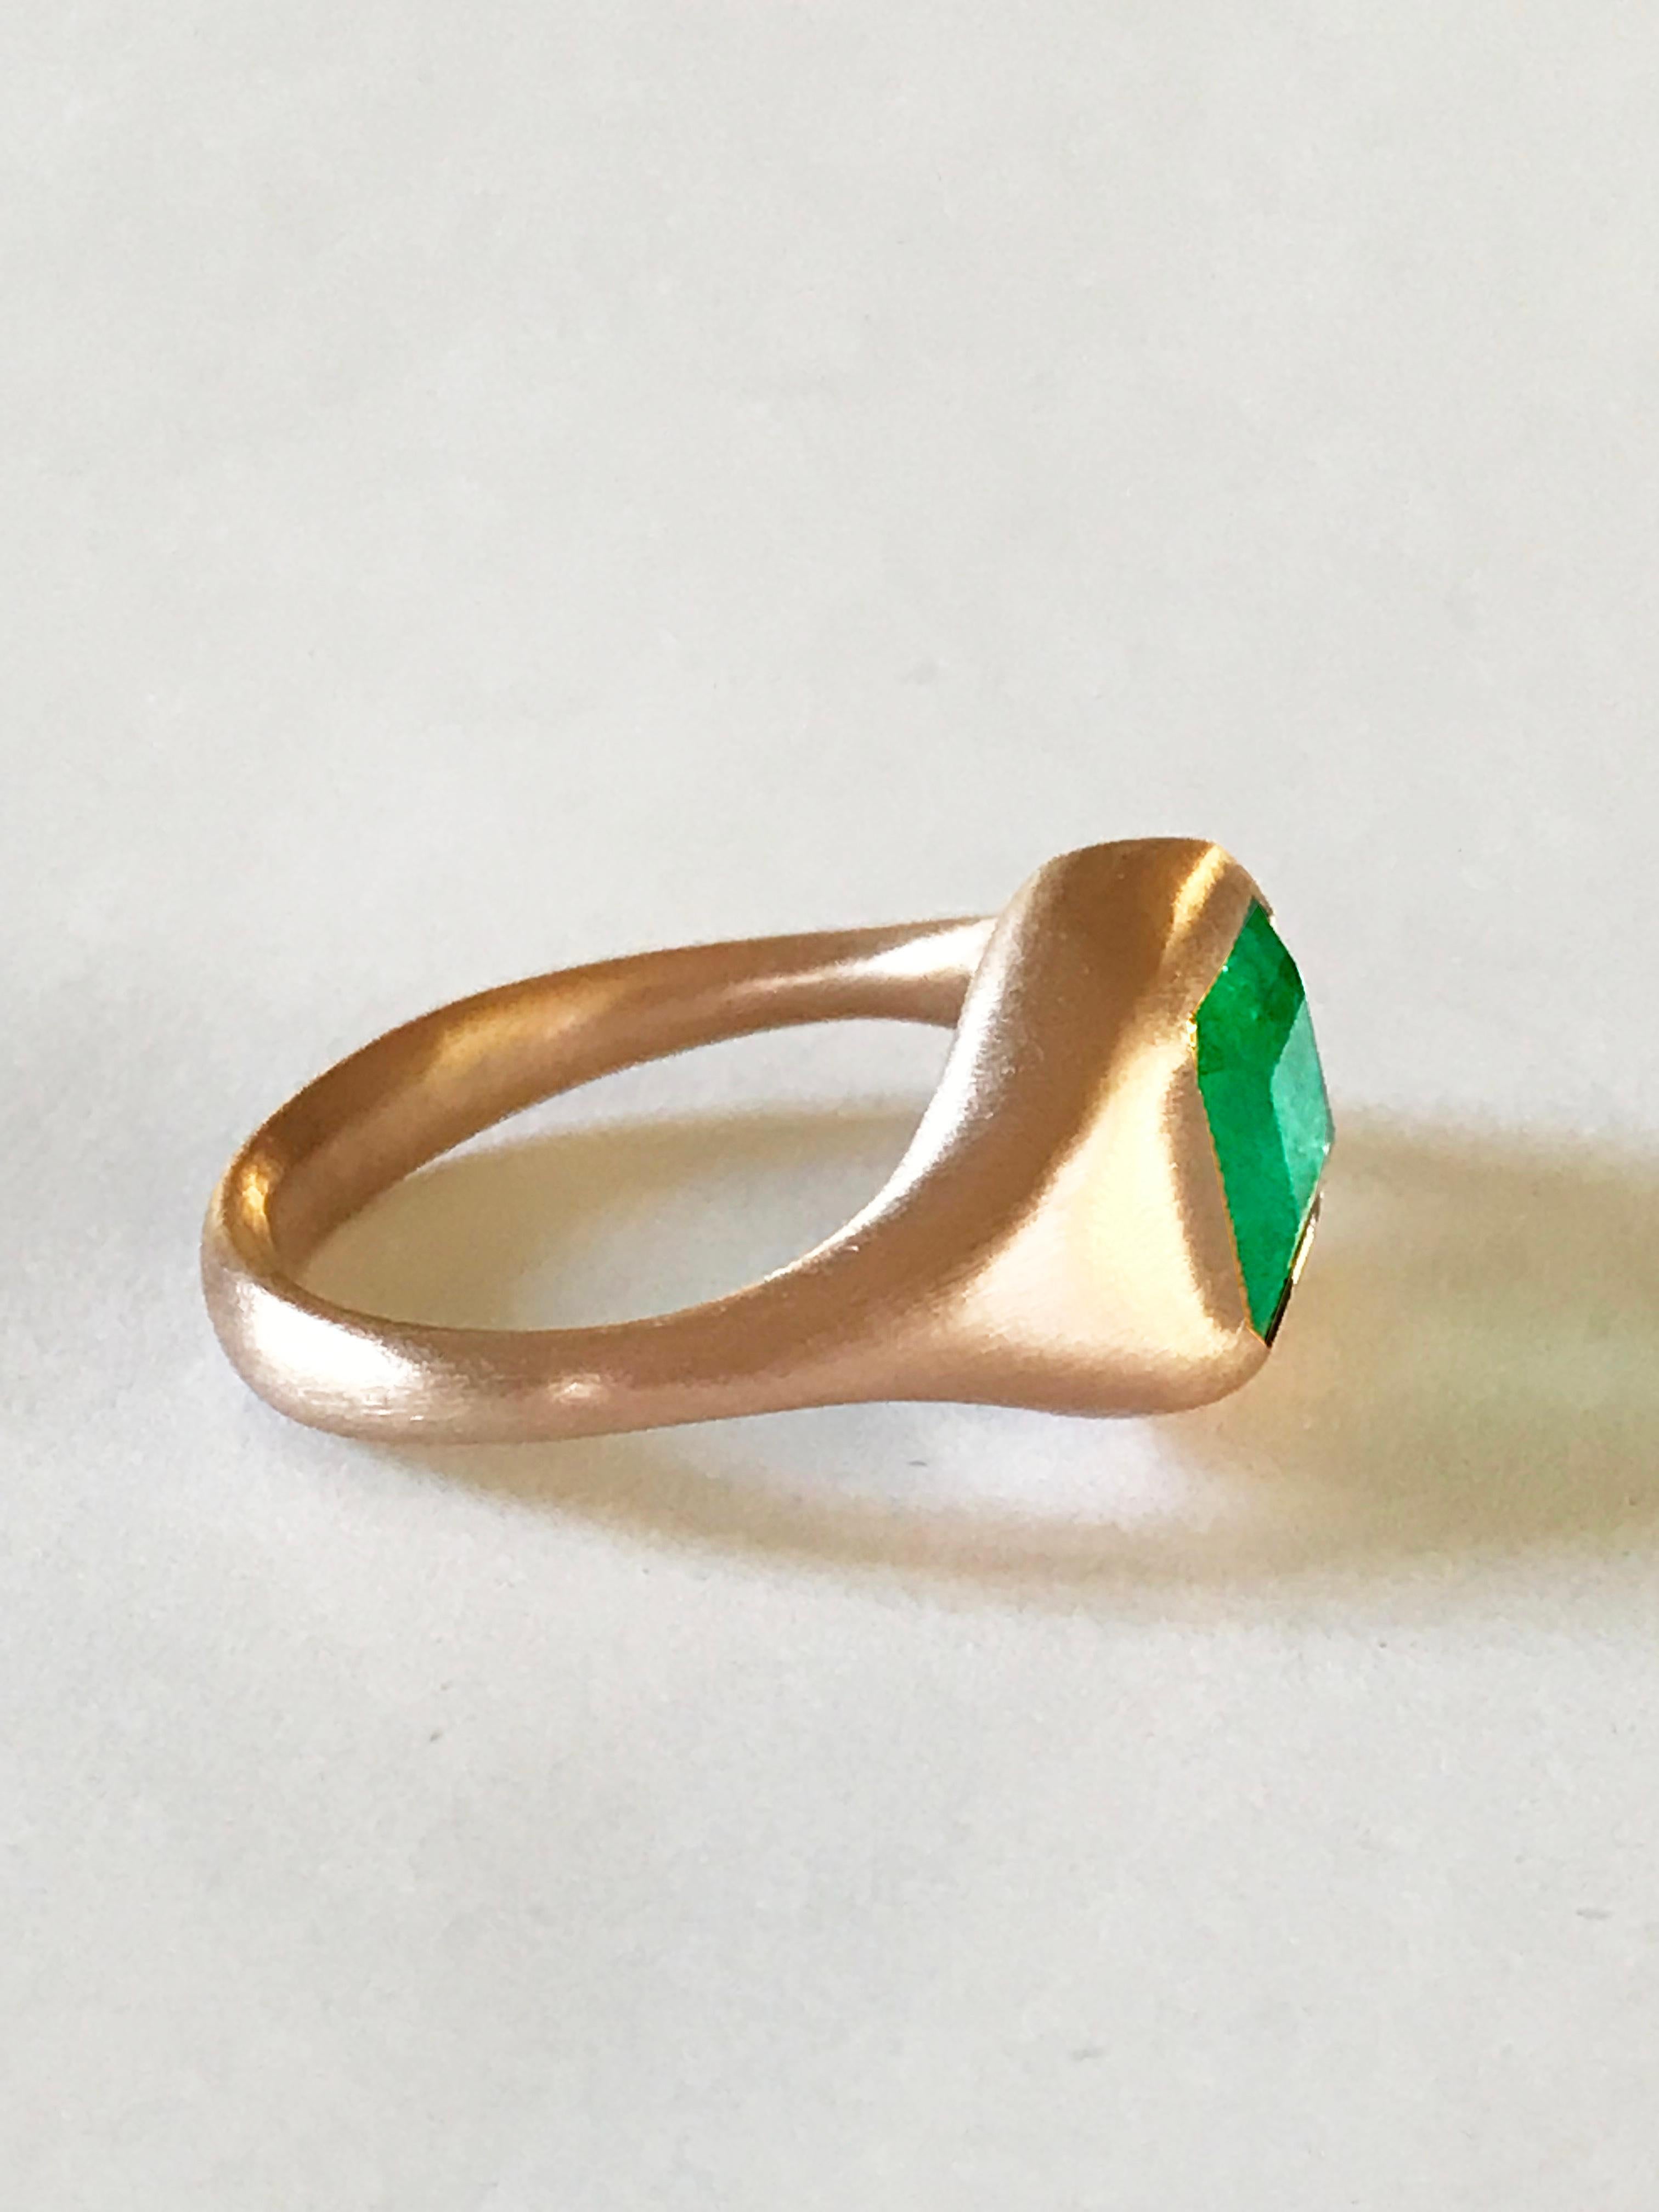 Dalben 2.46 Carat Colombian Emerald Rose Gold Ring For Sale 6